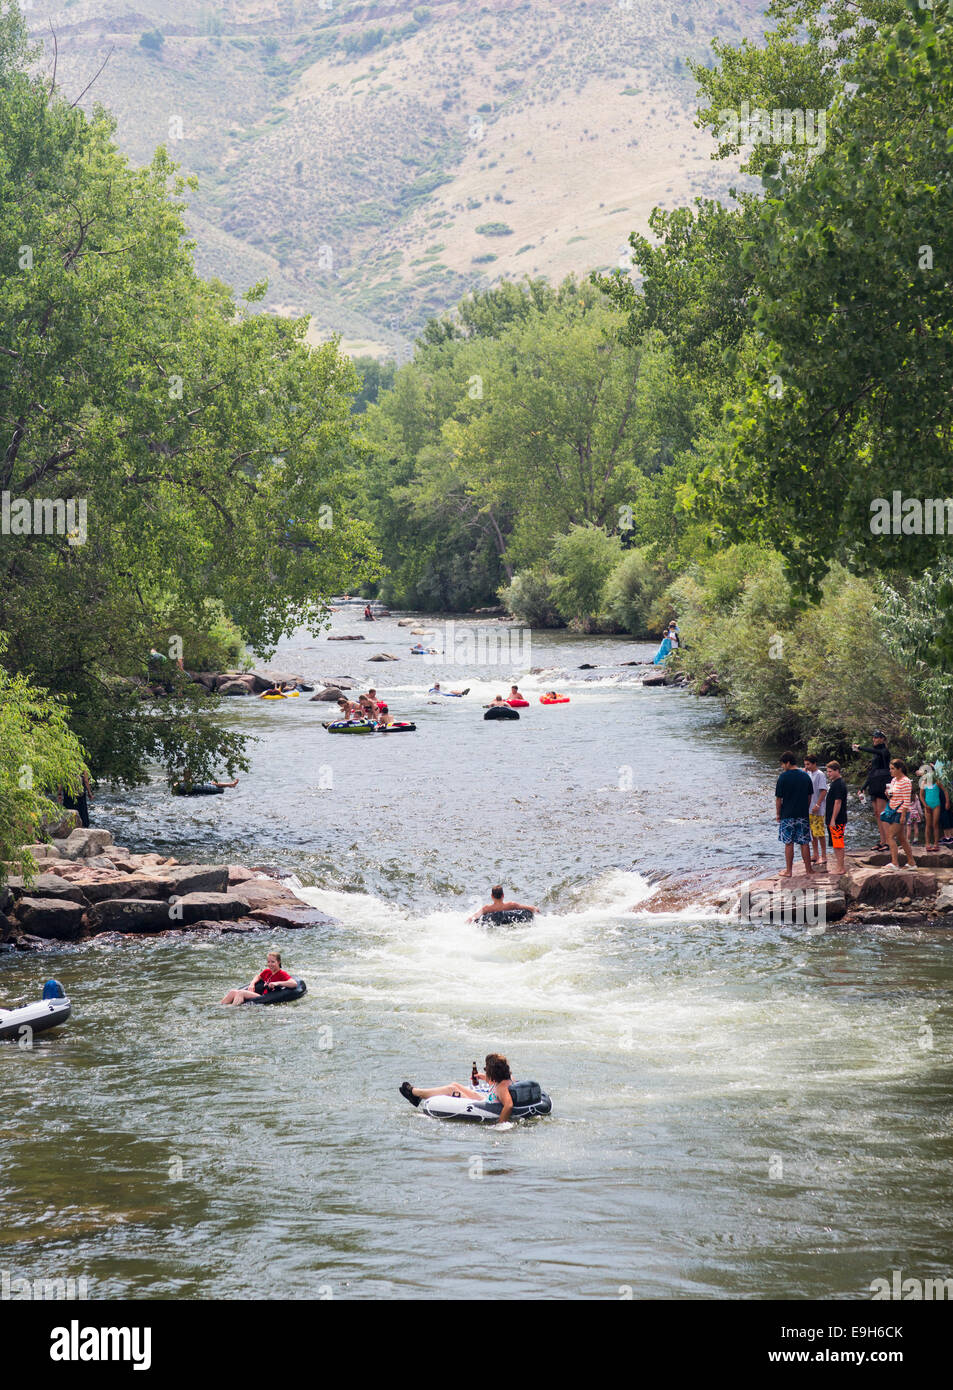 Clear Creek river in Golden, Colorado, USA - with people on the river in tubes and rafts Stock Photo